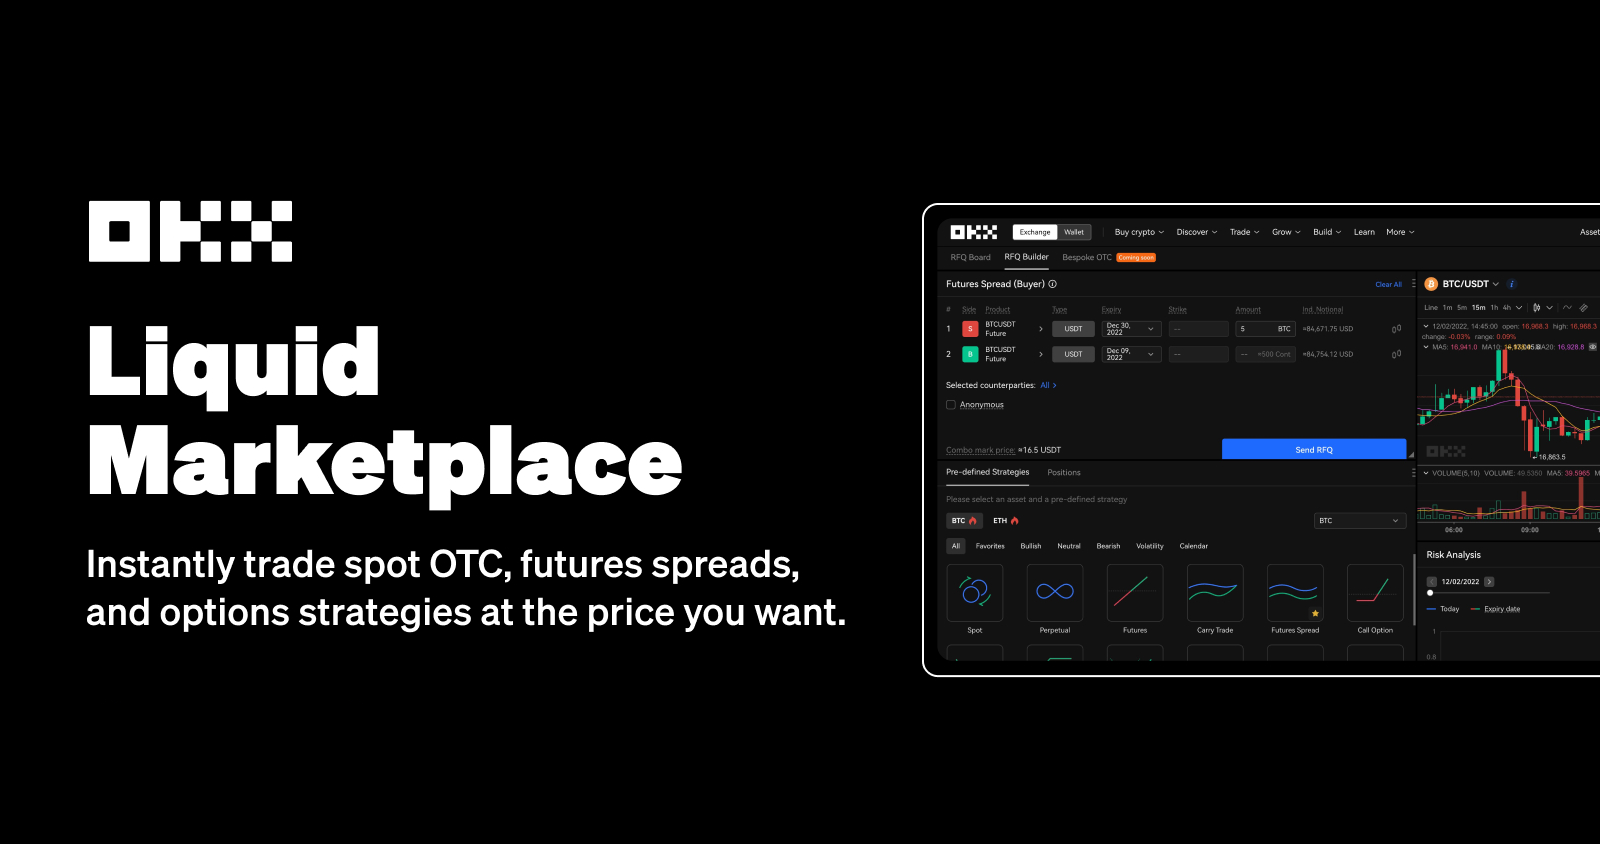 OKX Liquid Marketplace: Trade any strategies, at the size and price you want